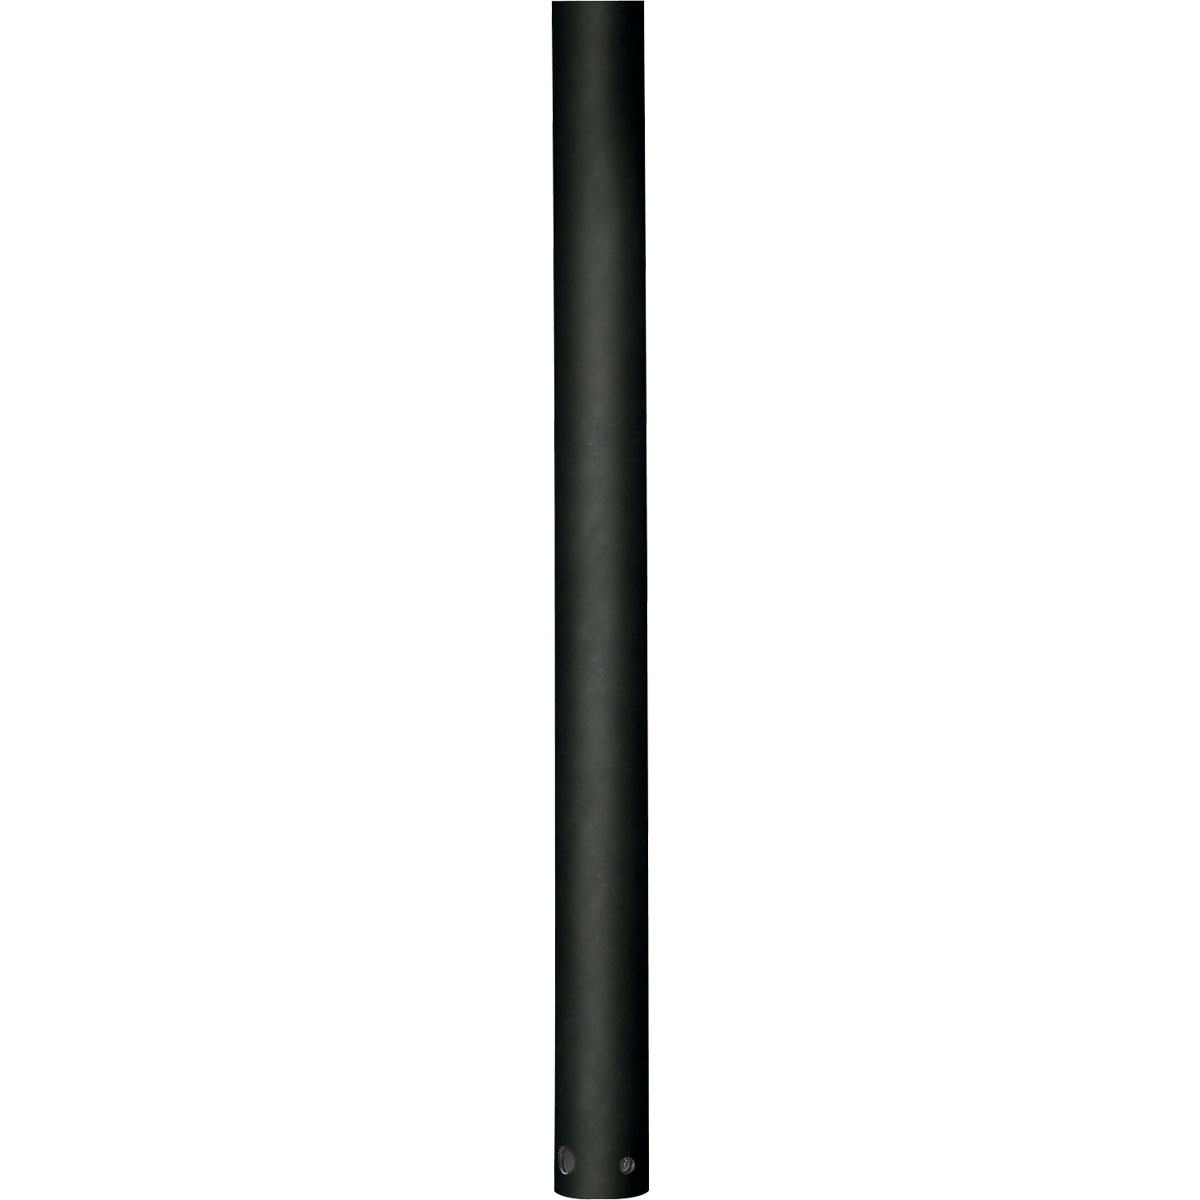 3/4 In. x 60 In. downrod for use with any Progress Lighting ceiling fan. Use of a fan downrod positions your ceiling fan at the optimal height for air circulation and provides the perfect solution for installation on high cathedral ceilings or in great rooms. Refer to the selection guide for recommended downrod lengths based upon your ceiling height. Forged Black finish.